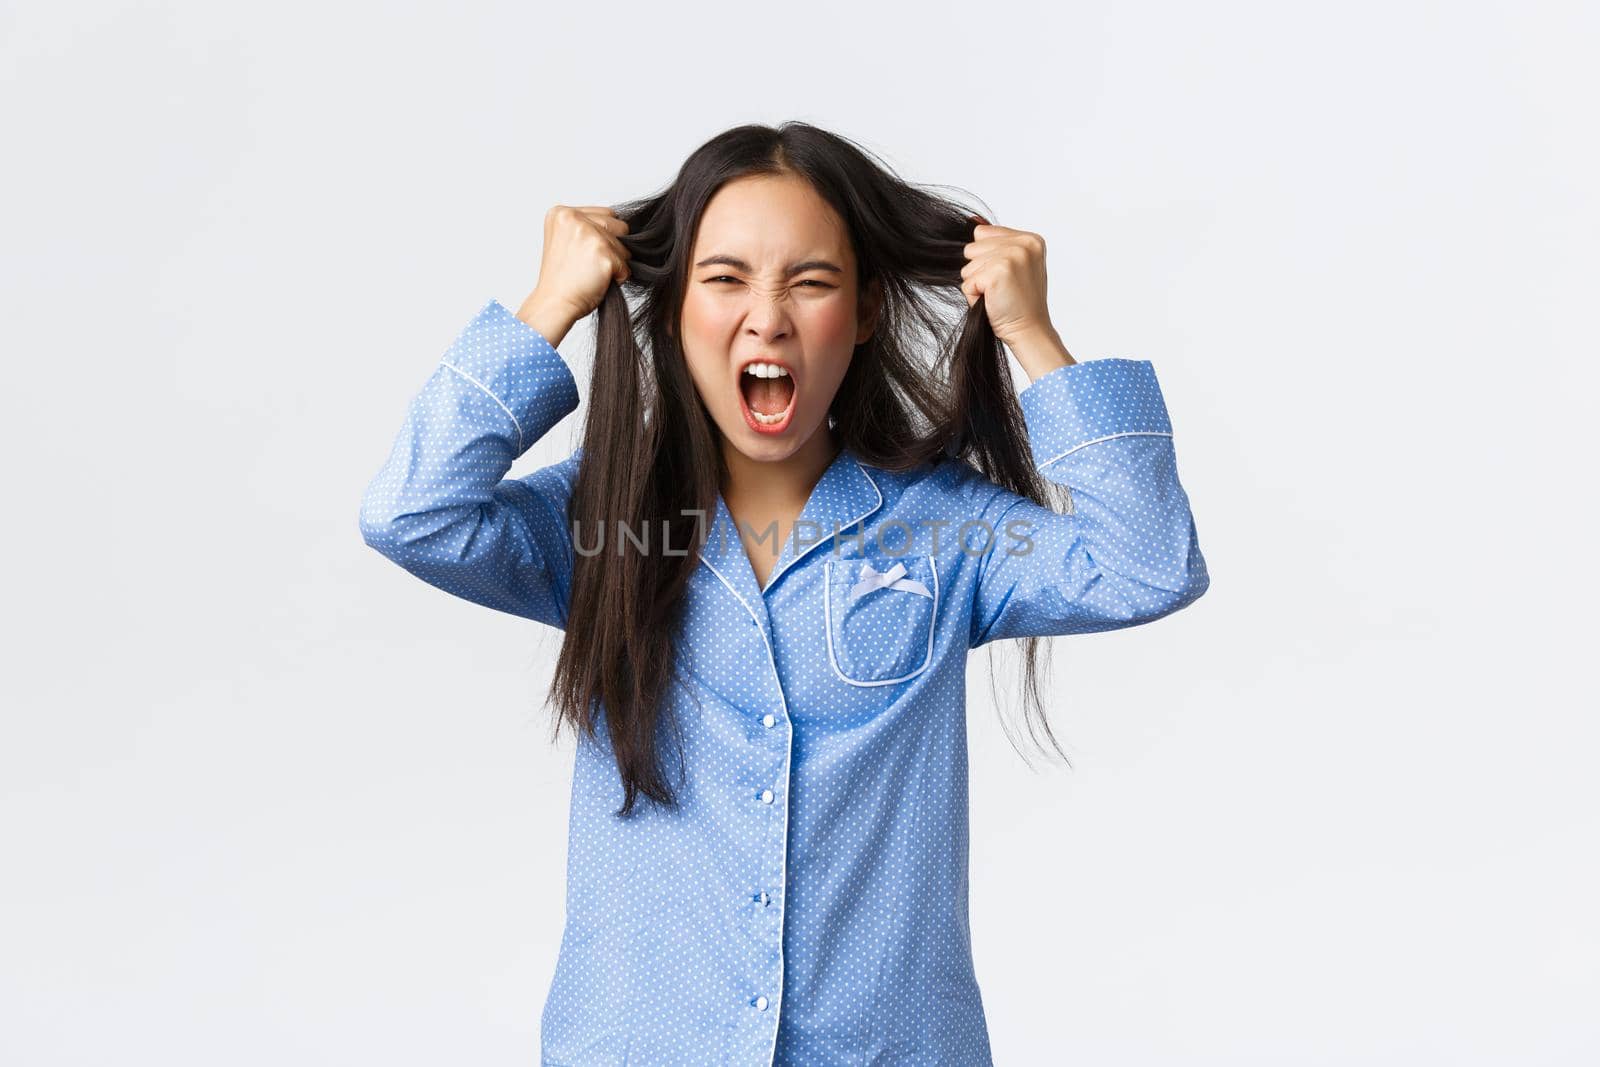 Outraged and pissed-off korean girl in blue pajamas tossing hair from head and screaming angry, standing frustrated, feeling fed up and depressed, standing bothered over white background.